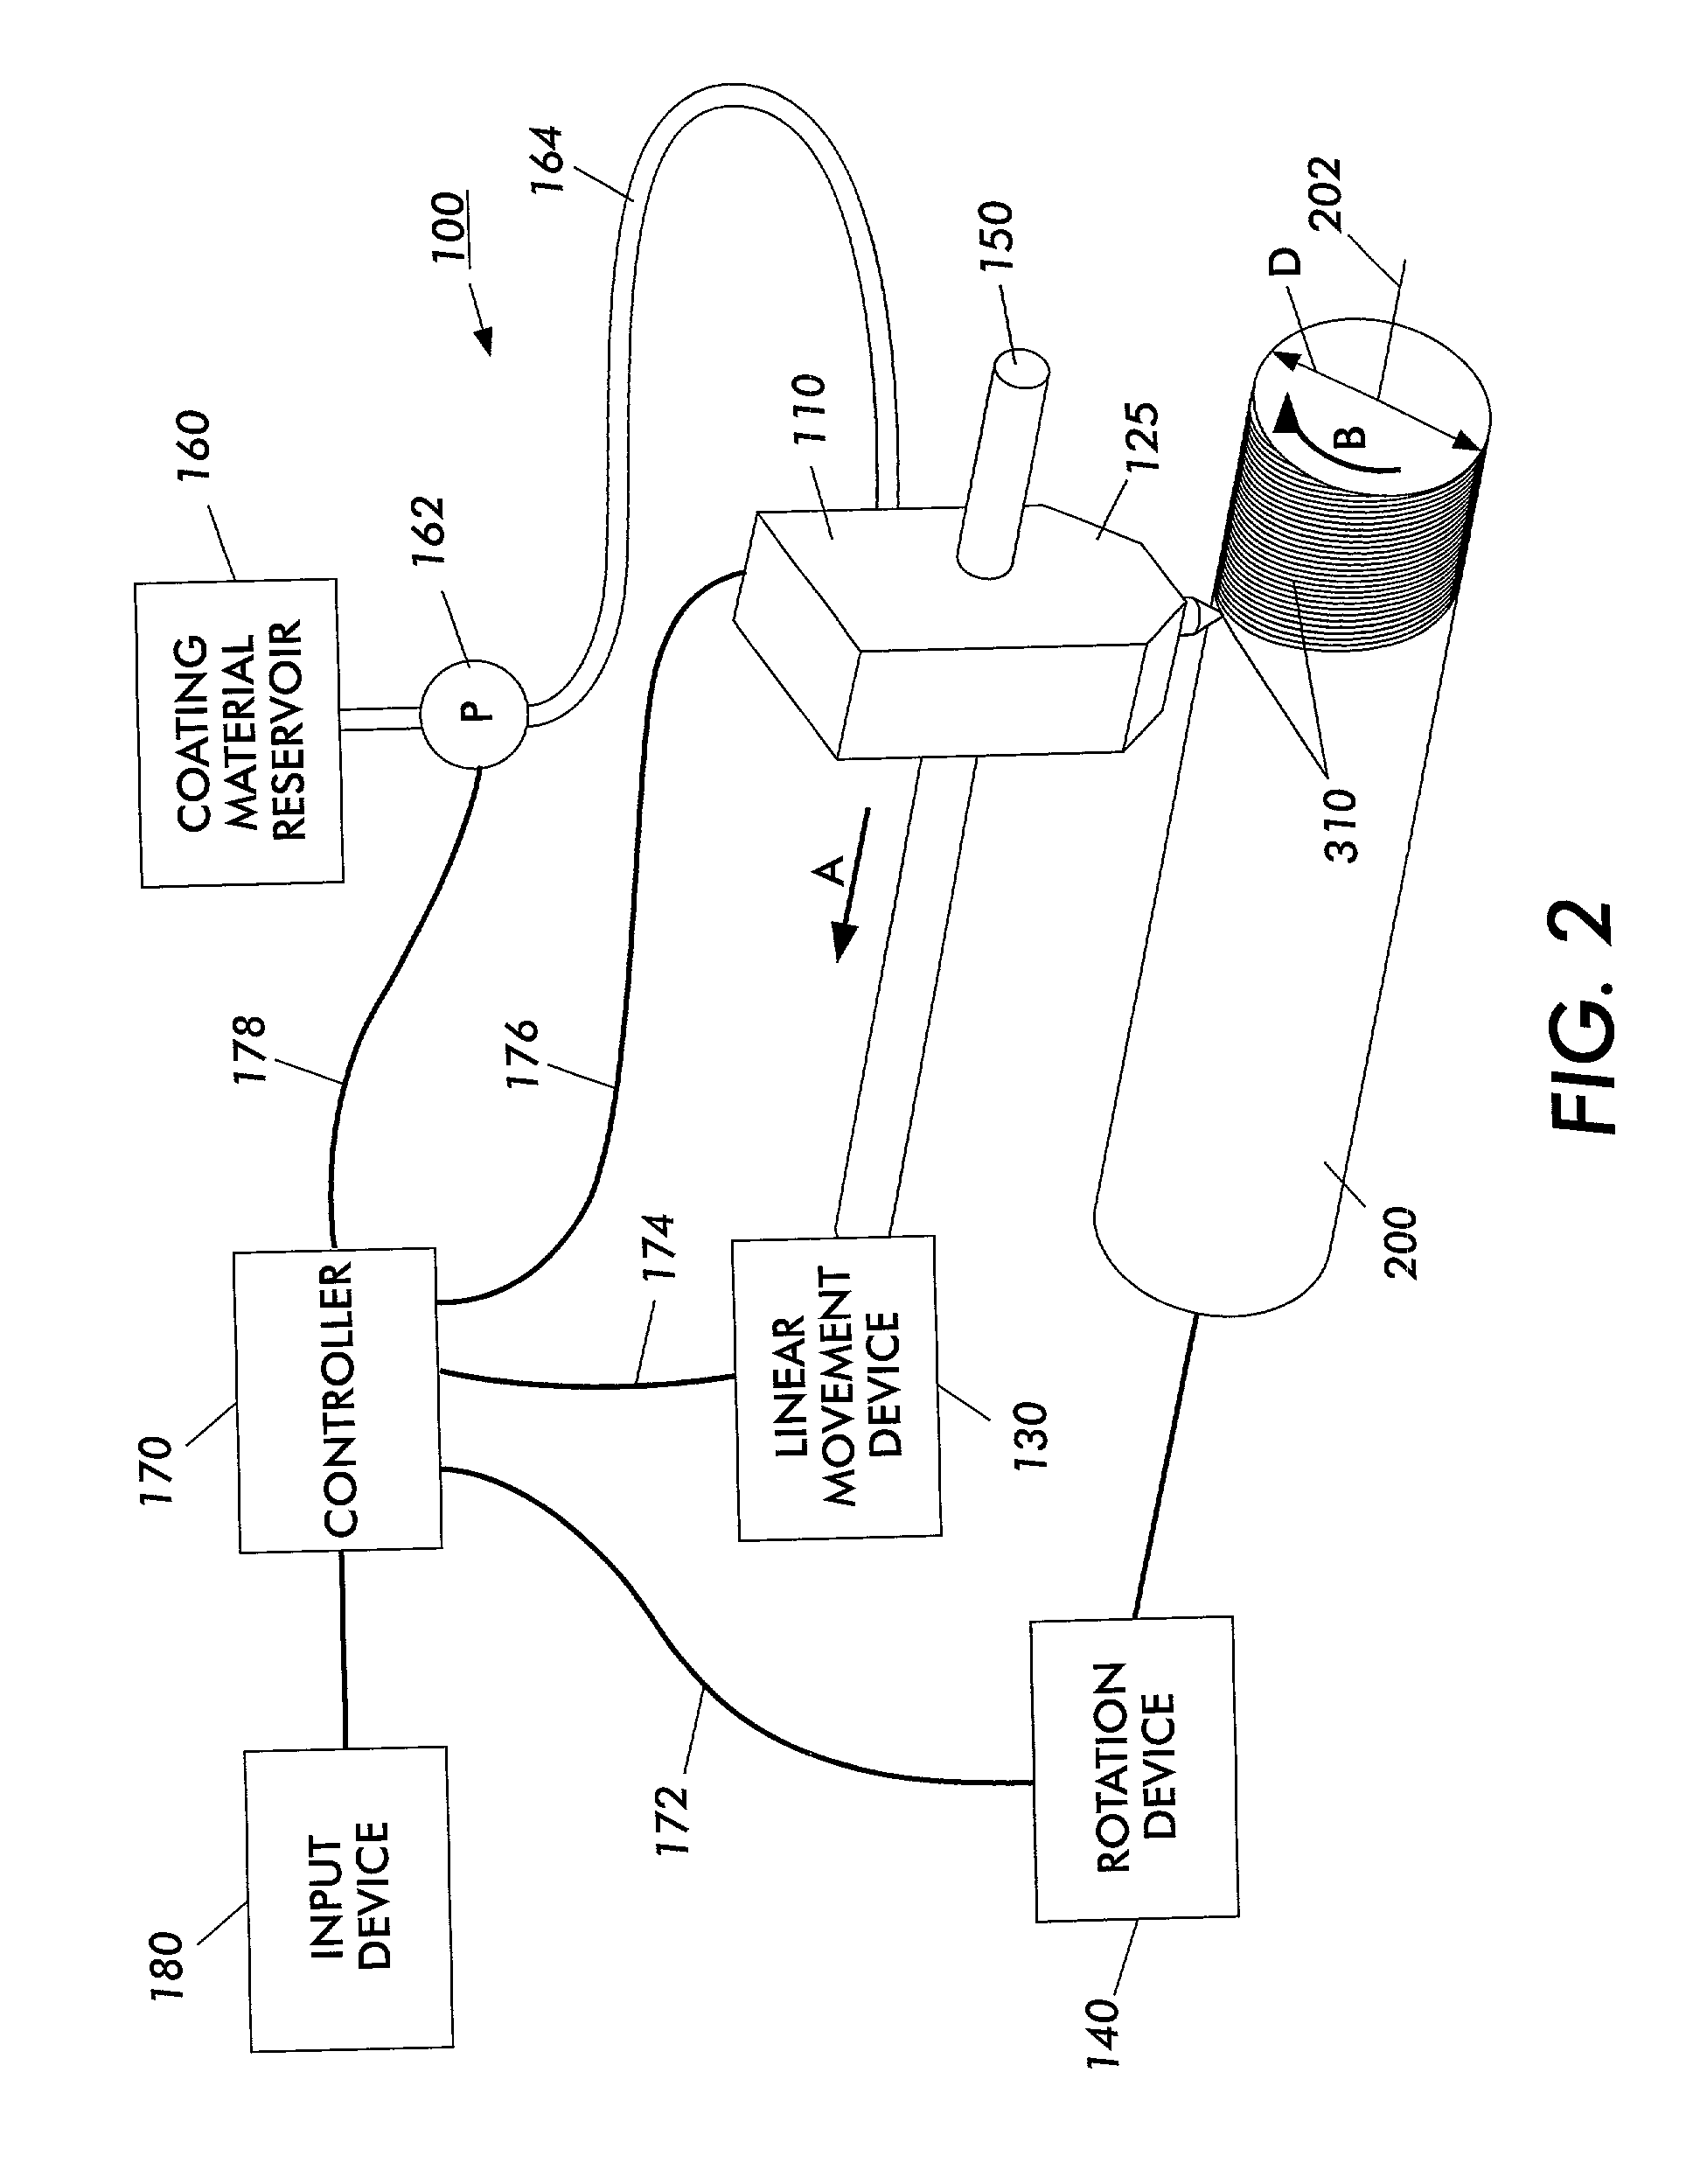 Processes for coating photoconductors